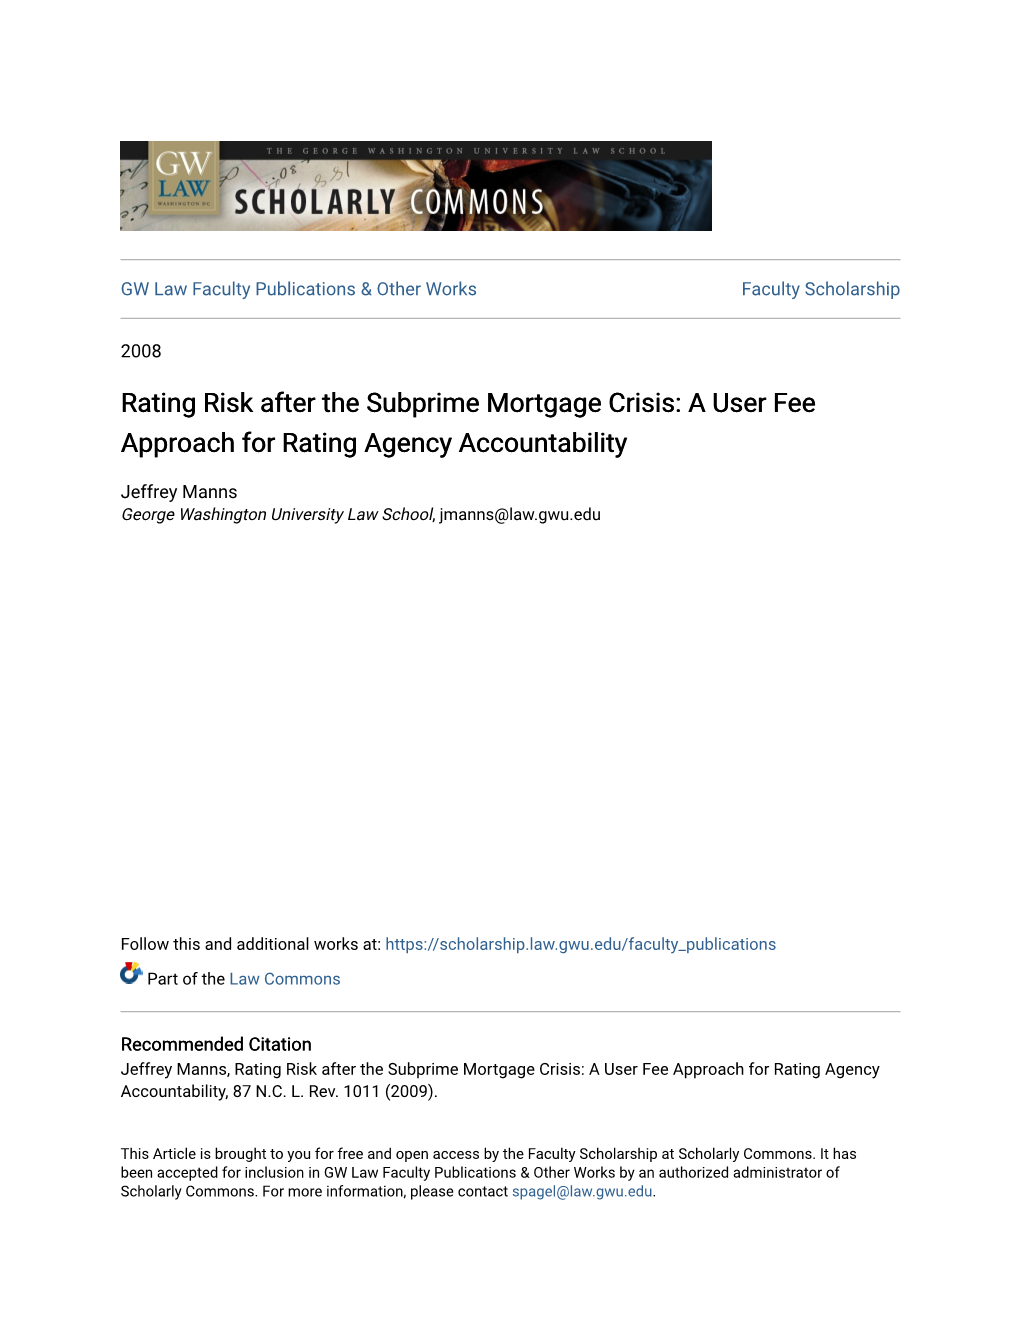 Rating Risk After the Subprime Mortgage Crisis: a User Fee Approach for Rating Agency Accountability